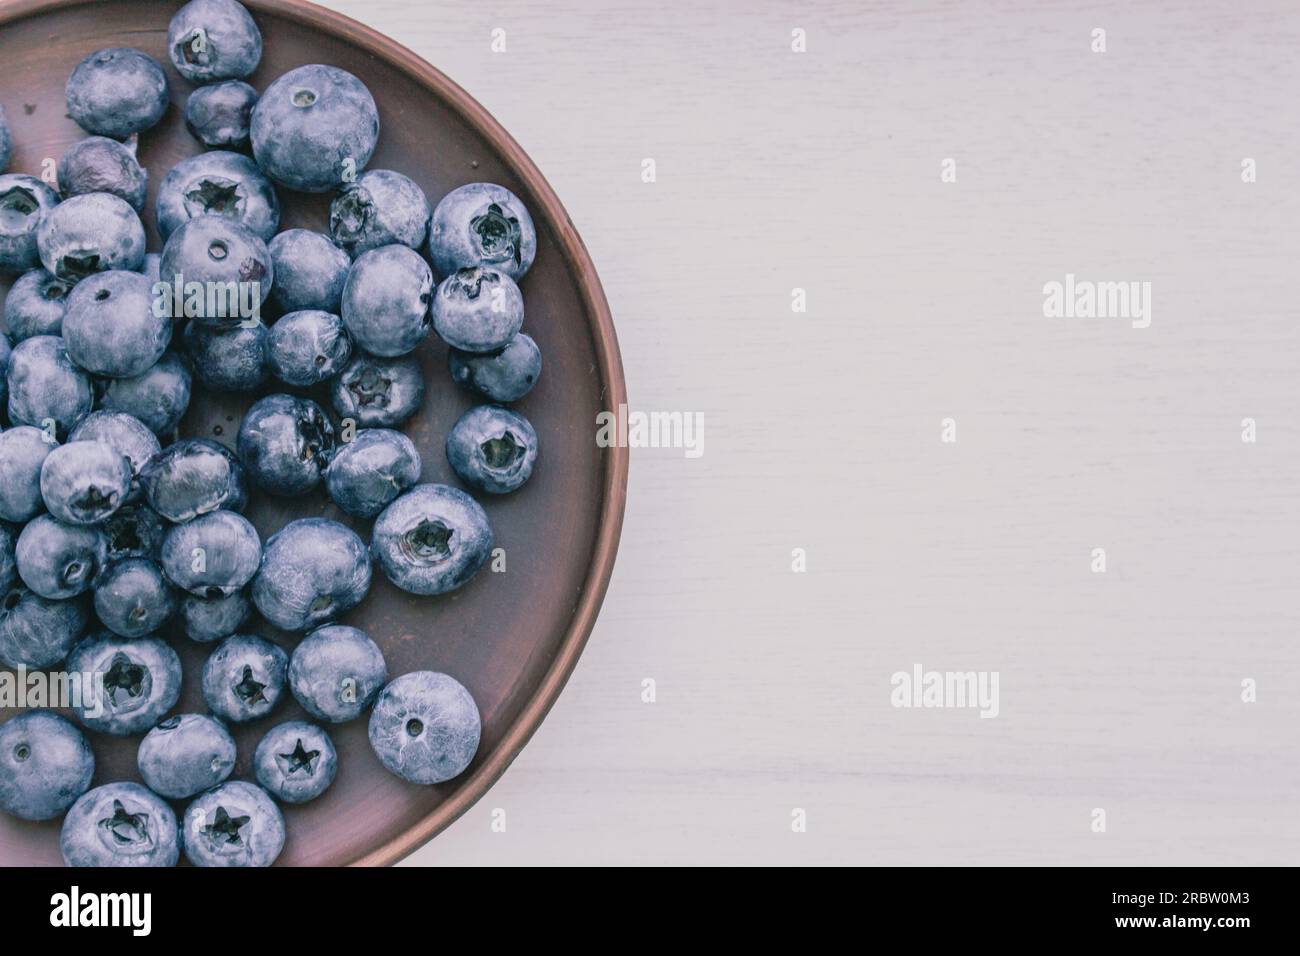 Blueberries on plate on white background with copy space. Blueberries in ceramic bowl. Antioxidant berries. Raw food. Sweet ripe berries. Stock Photo